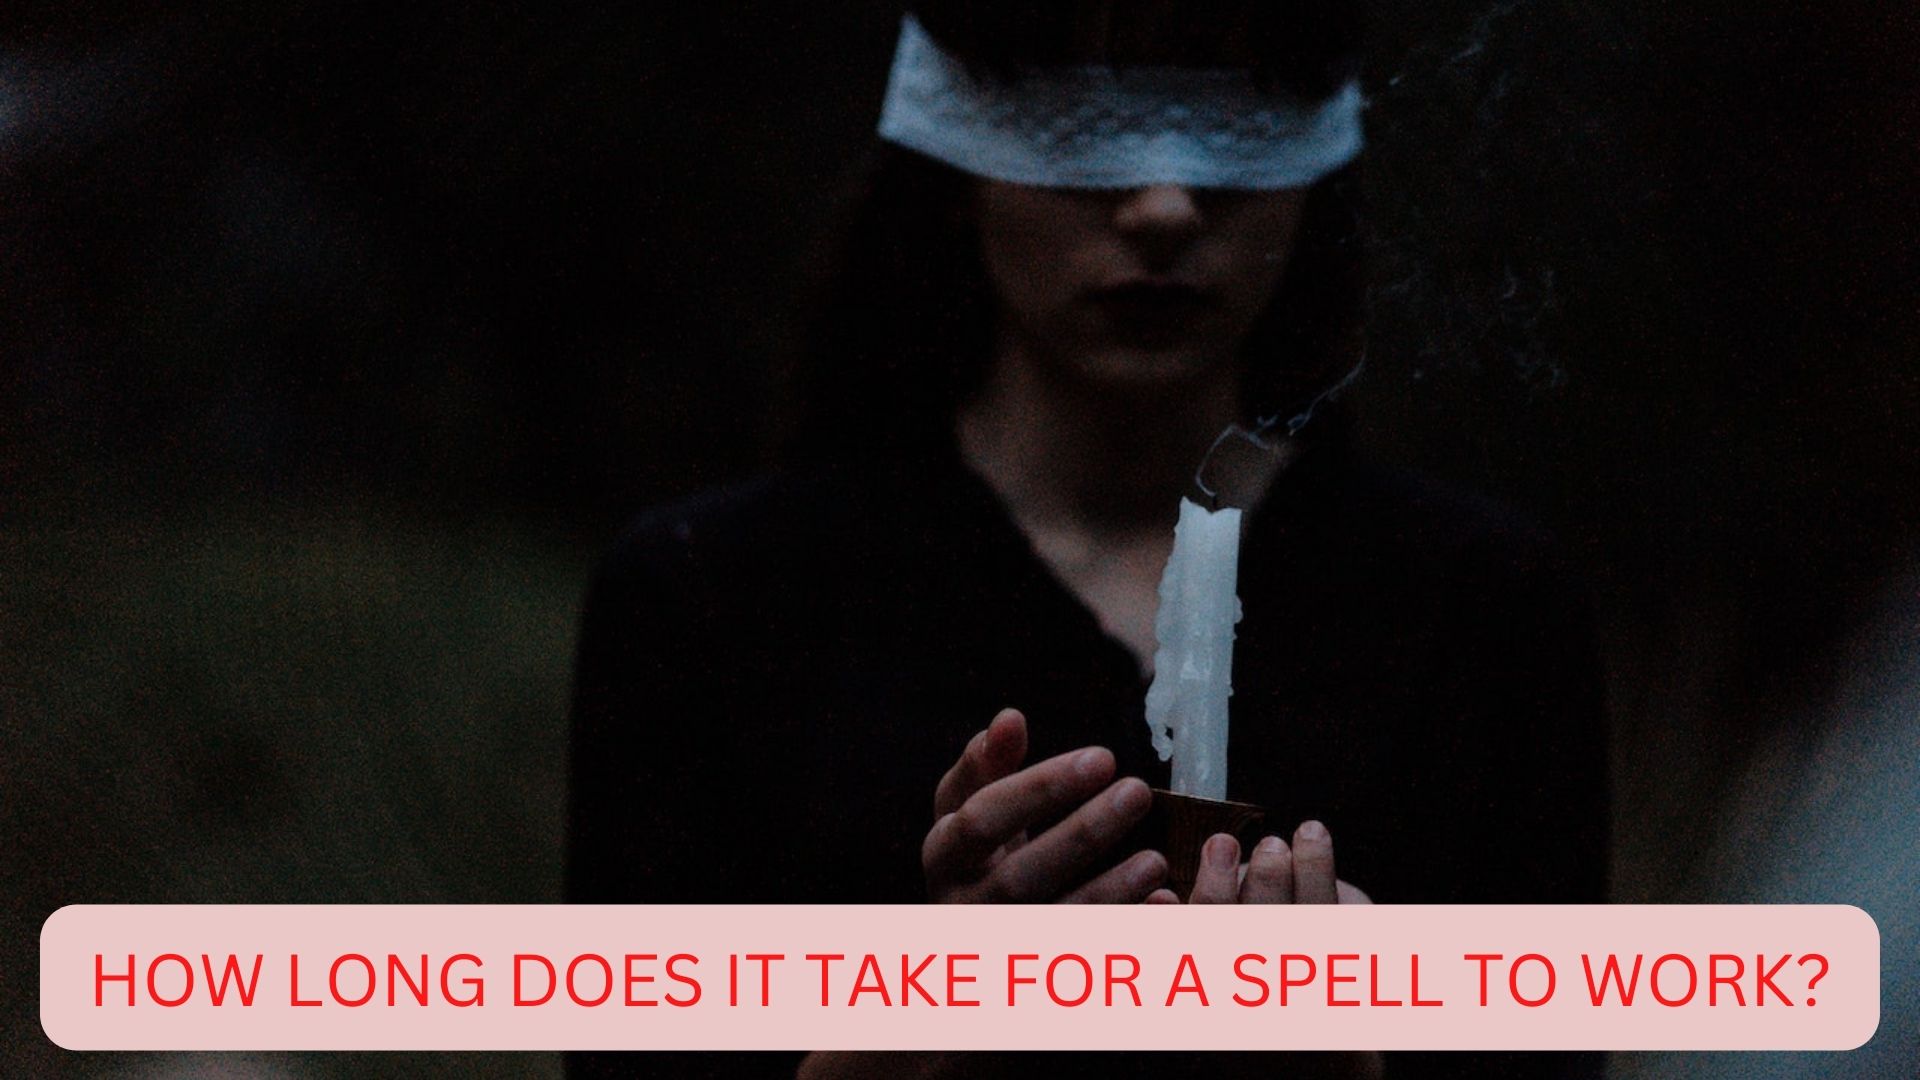 How Long Does It Take For A Spell To Work?